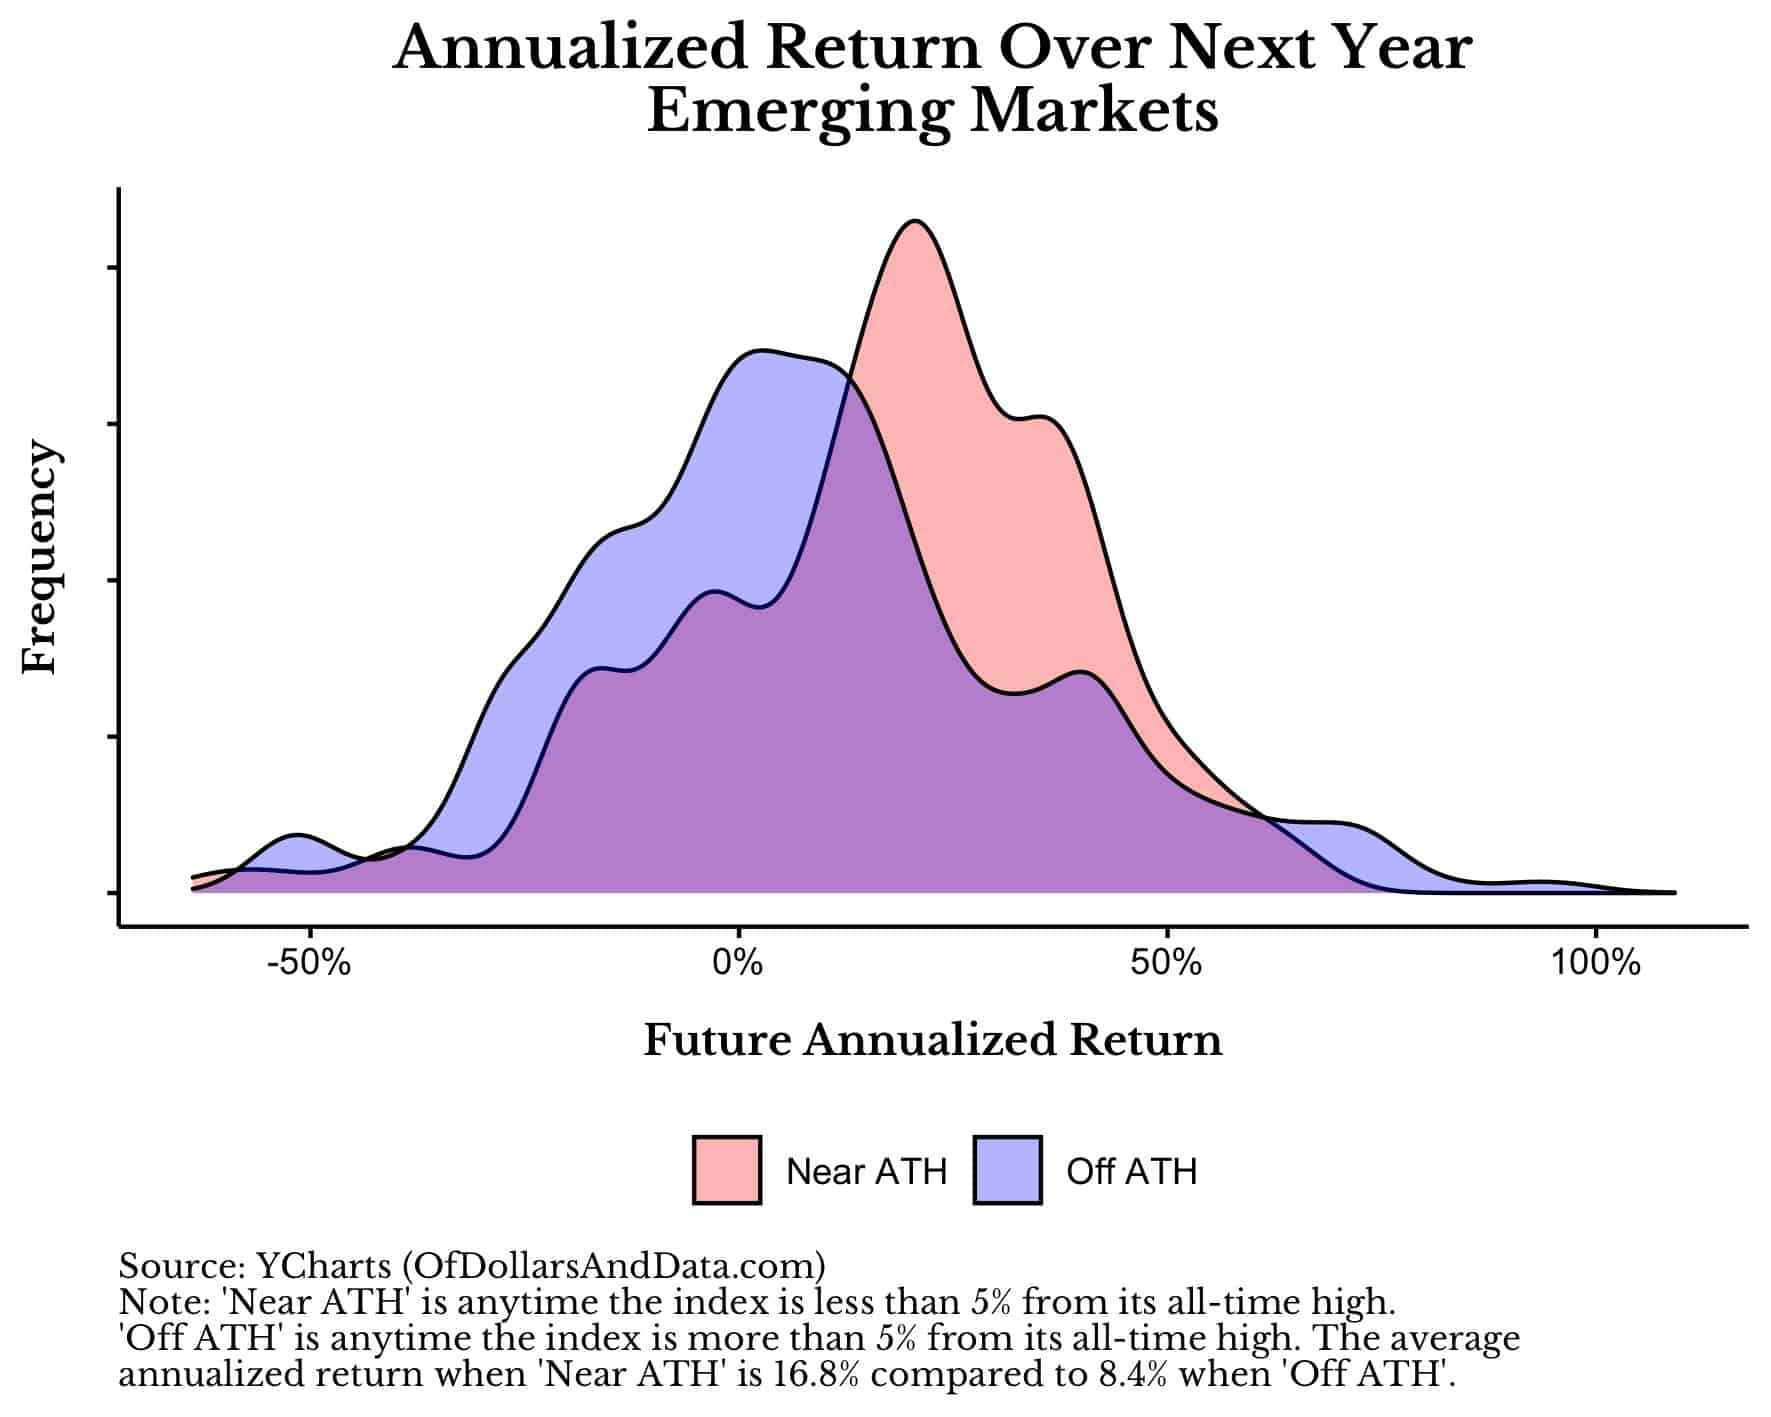 Annualized return distributions for Emerging Markets over the next year near and off all-time highs